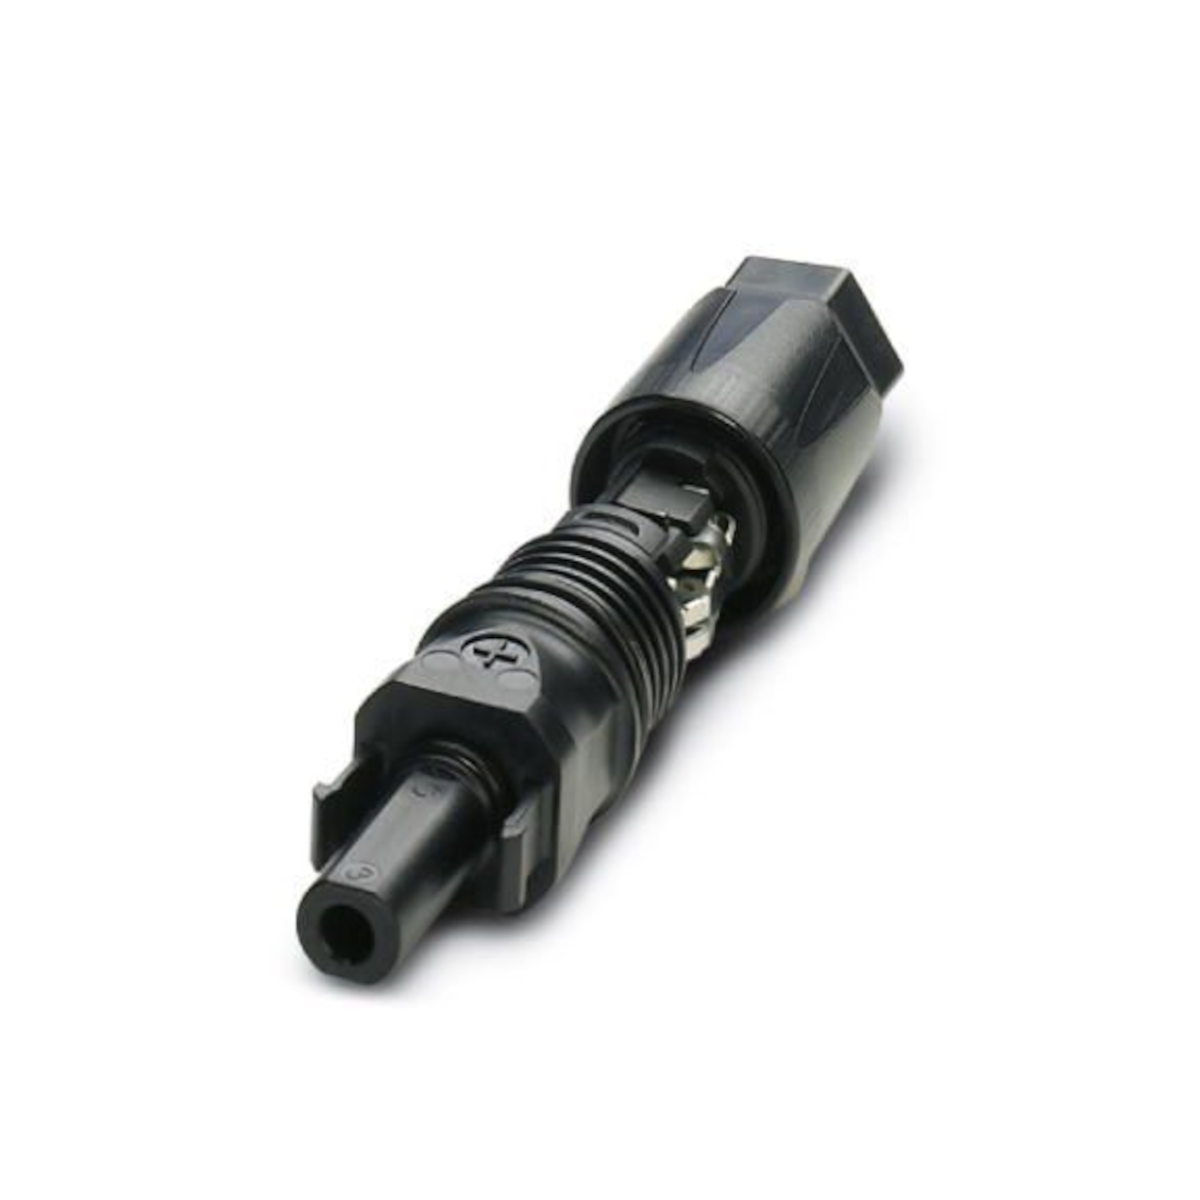 25/6 mm2 Sunclix serial connector set